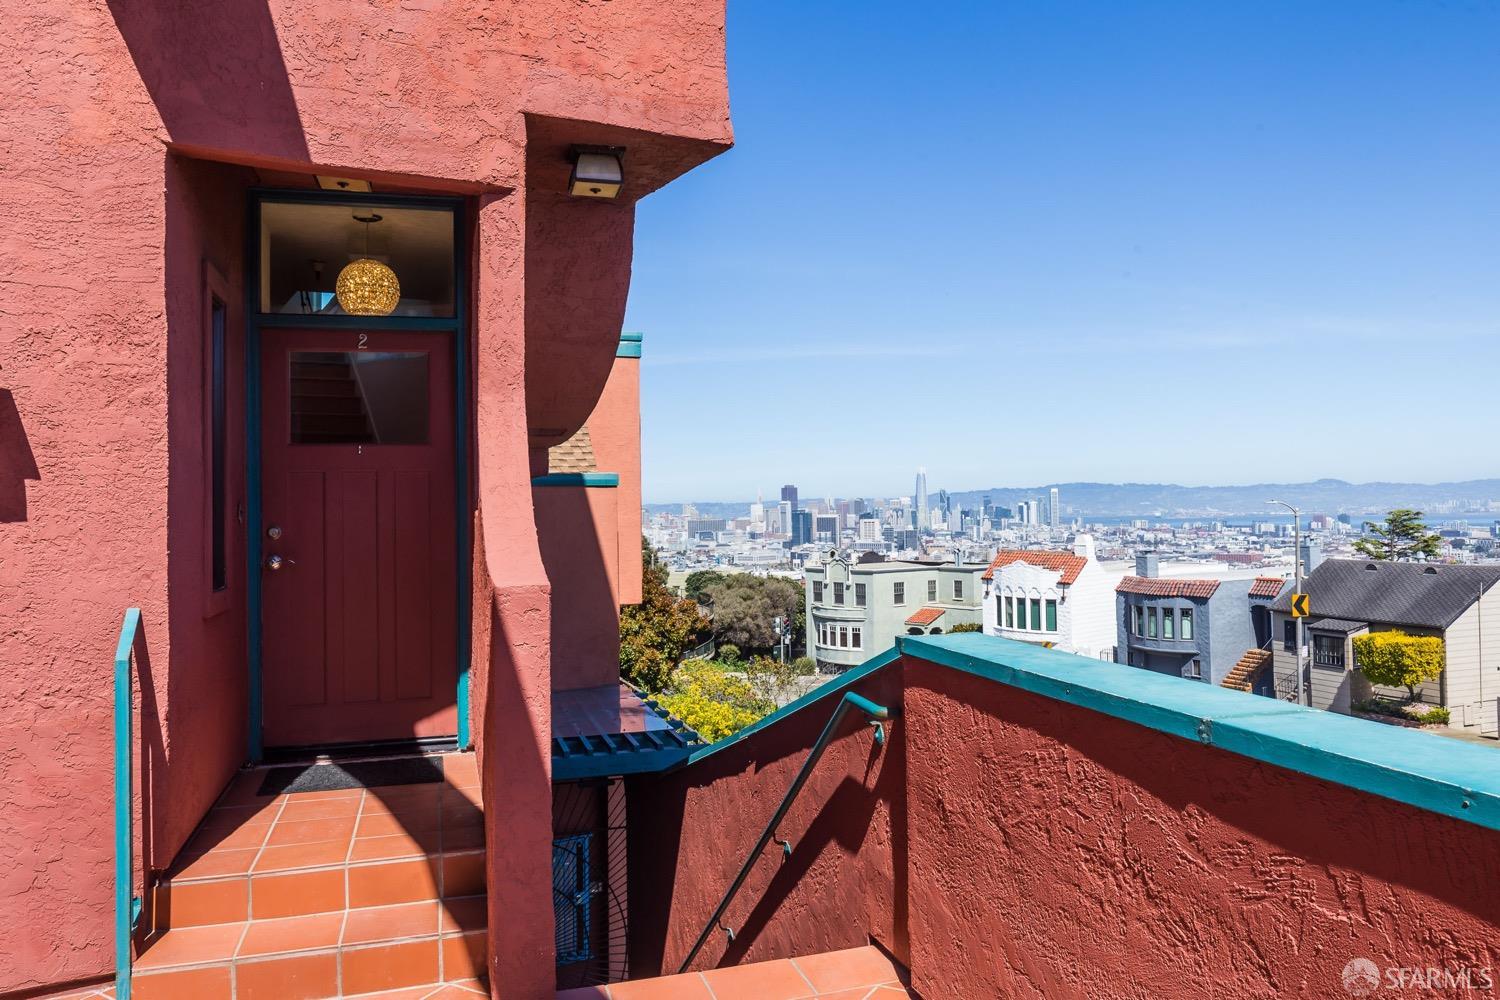 Gorgeous unobstructed views of the SF Skyline, from this rare townhouse-style condo (no one below you or above you) in a boutique 8 unit bldg, steps to Noe Valley, Eureka Valley, The Castro, Twin Peaks, Corona Heights and Buena Vista. This two bedroom two & one half bathroom residence boasts bamboo flooring, a cozy fireplace & double height ceilings in the living room, an oversized chef's kitchen with granite counters and bay window. This spectacular corner unit with extra windows and Northeast exposure gets flooded with natural light. In-unit laundry. Newer decks from 2021. Newer doors and custom windows. Swarovski crystal chandeliers in the entry & dining rooms. Newer furnace with AC for those hot SF summer days. Humidifier & whole house air filtration system, whole house fan (constant fully filtered air stream 24/7, filtering the air & constantly returning fresh filtered cleaned air), and blue light filter. Very well run HOA with many common area upgrades; newer courtyard tile, new exterior paint and lighting, new roofs, and newer automatic gas shut off values. Garage space is wide enough for 2 cars, plus storage, plus extra storage cabinets. But the real show stopper is the unobstructed view of the majestic San Francisco skyline right from the living room!